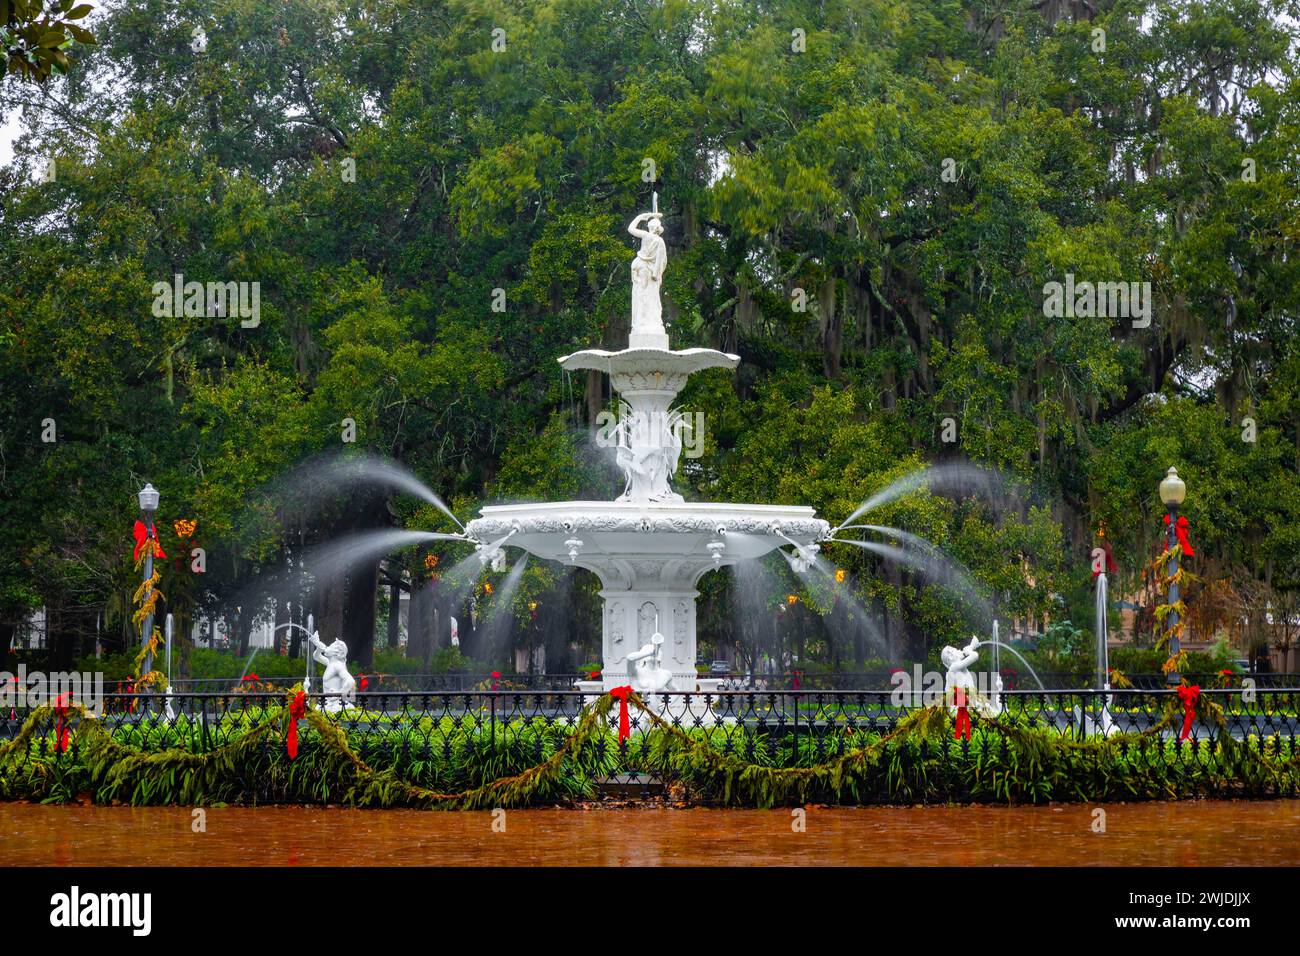 Beautiful vintage fountain at Forsyth Park in Savannah Georgia local attraction Stock Photo